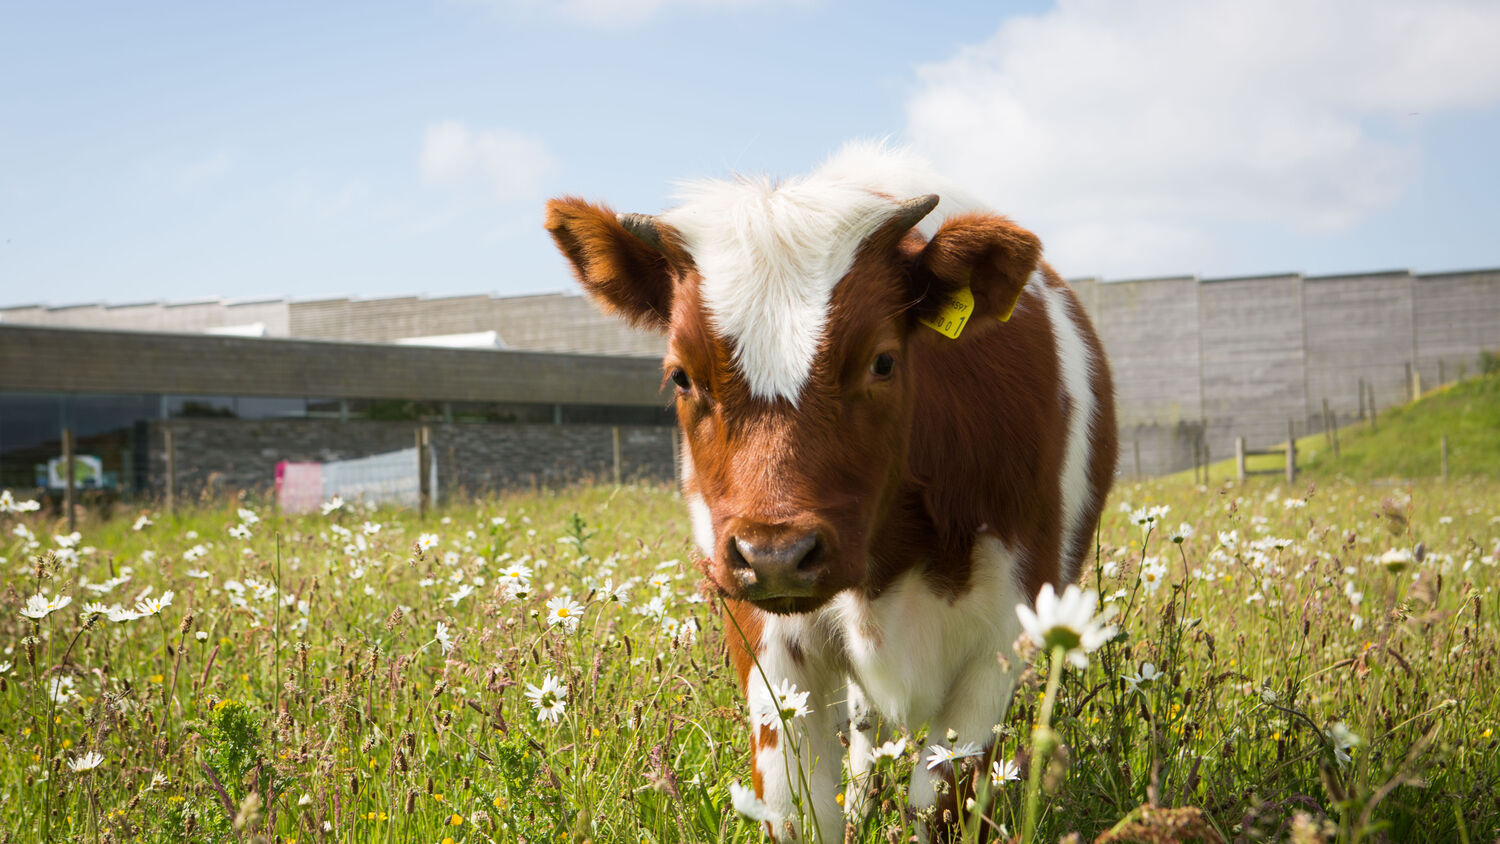 A Shetland calf is standing in a meadow, with Culloden Visitor Centre in the background.